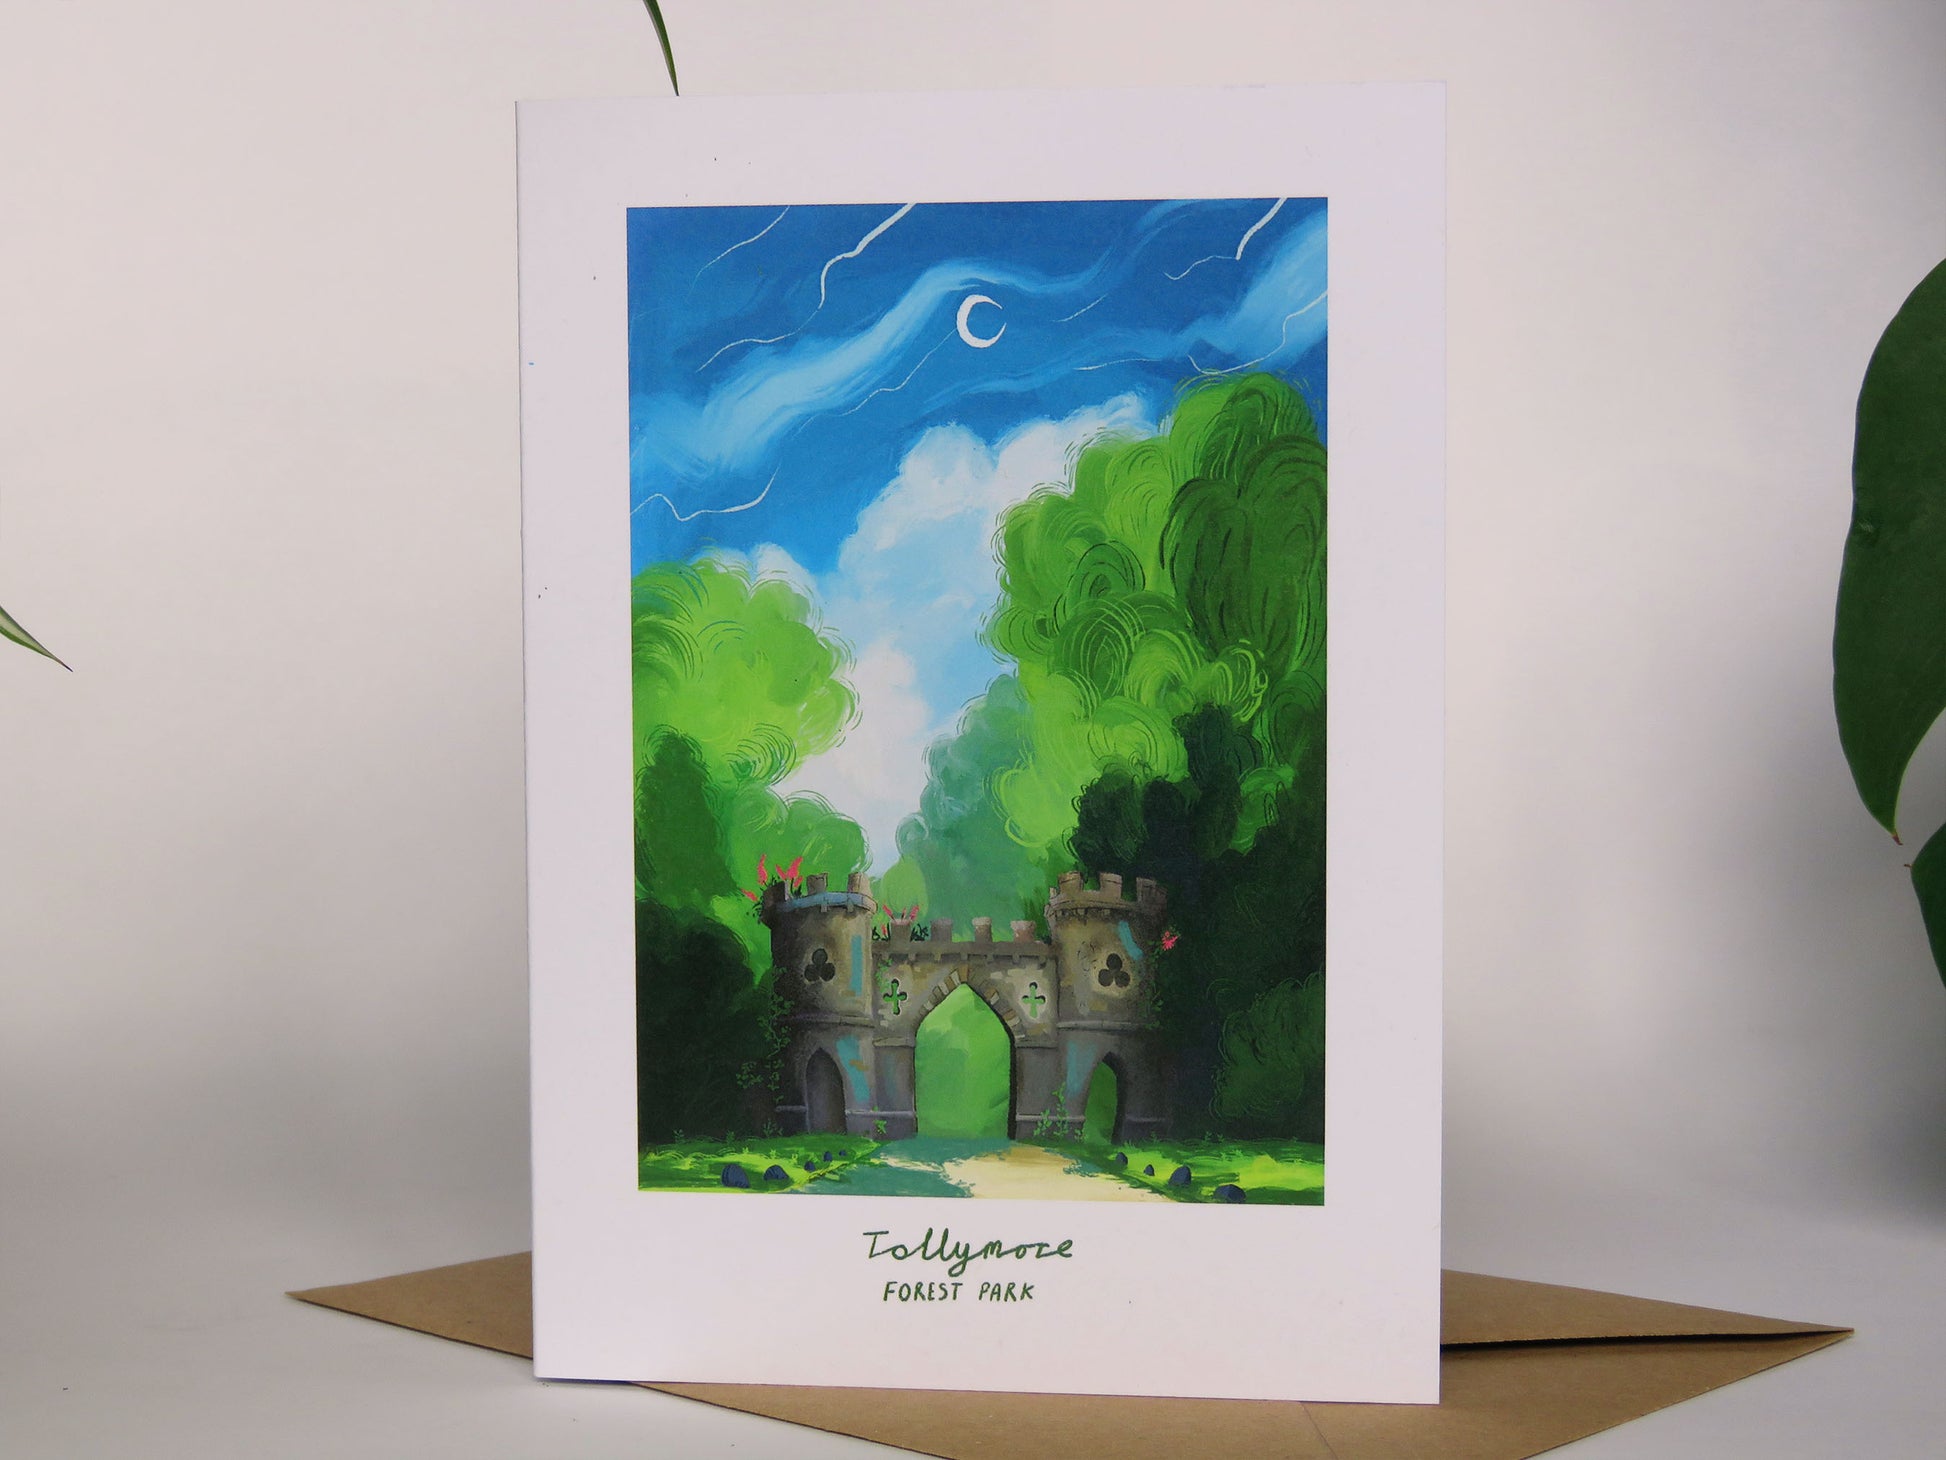 Tollymore Forest Park Gates Card - A6 card - tollymore gates - trees in the background - blue sky